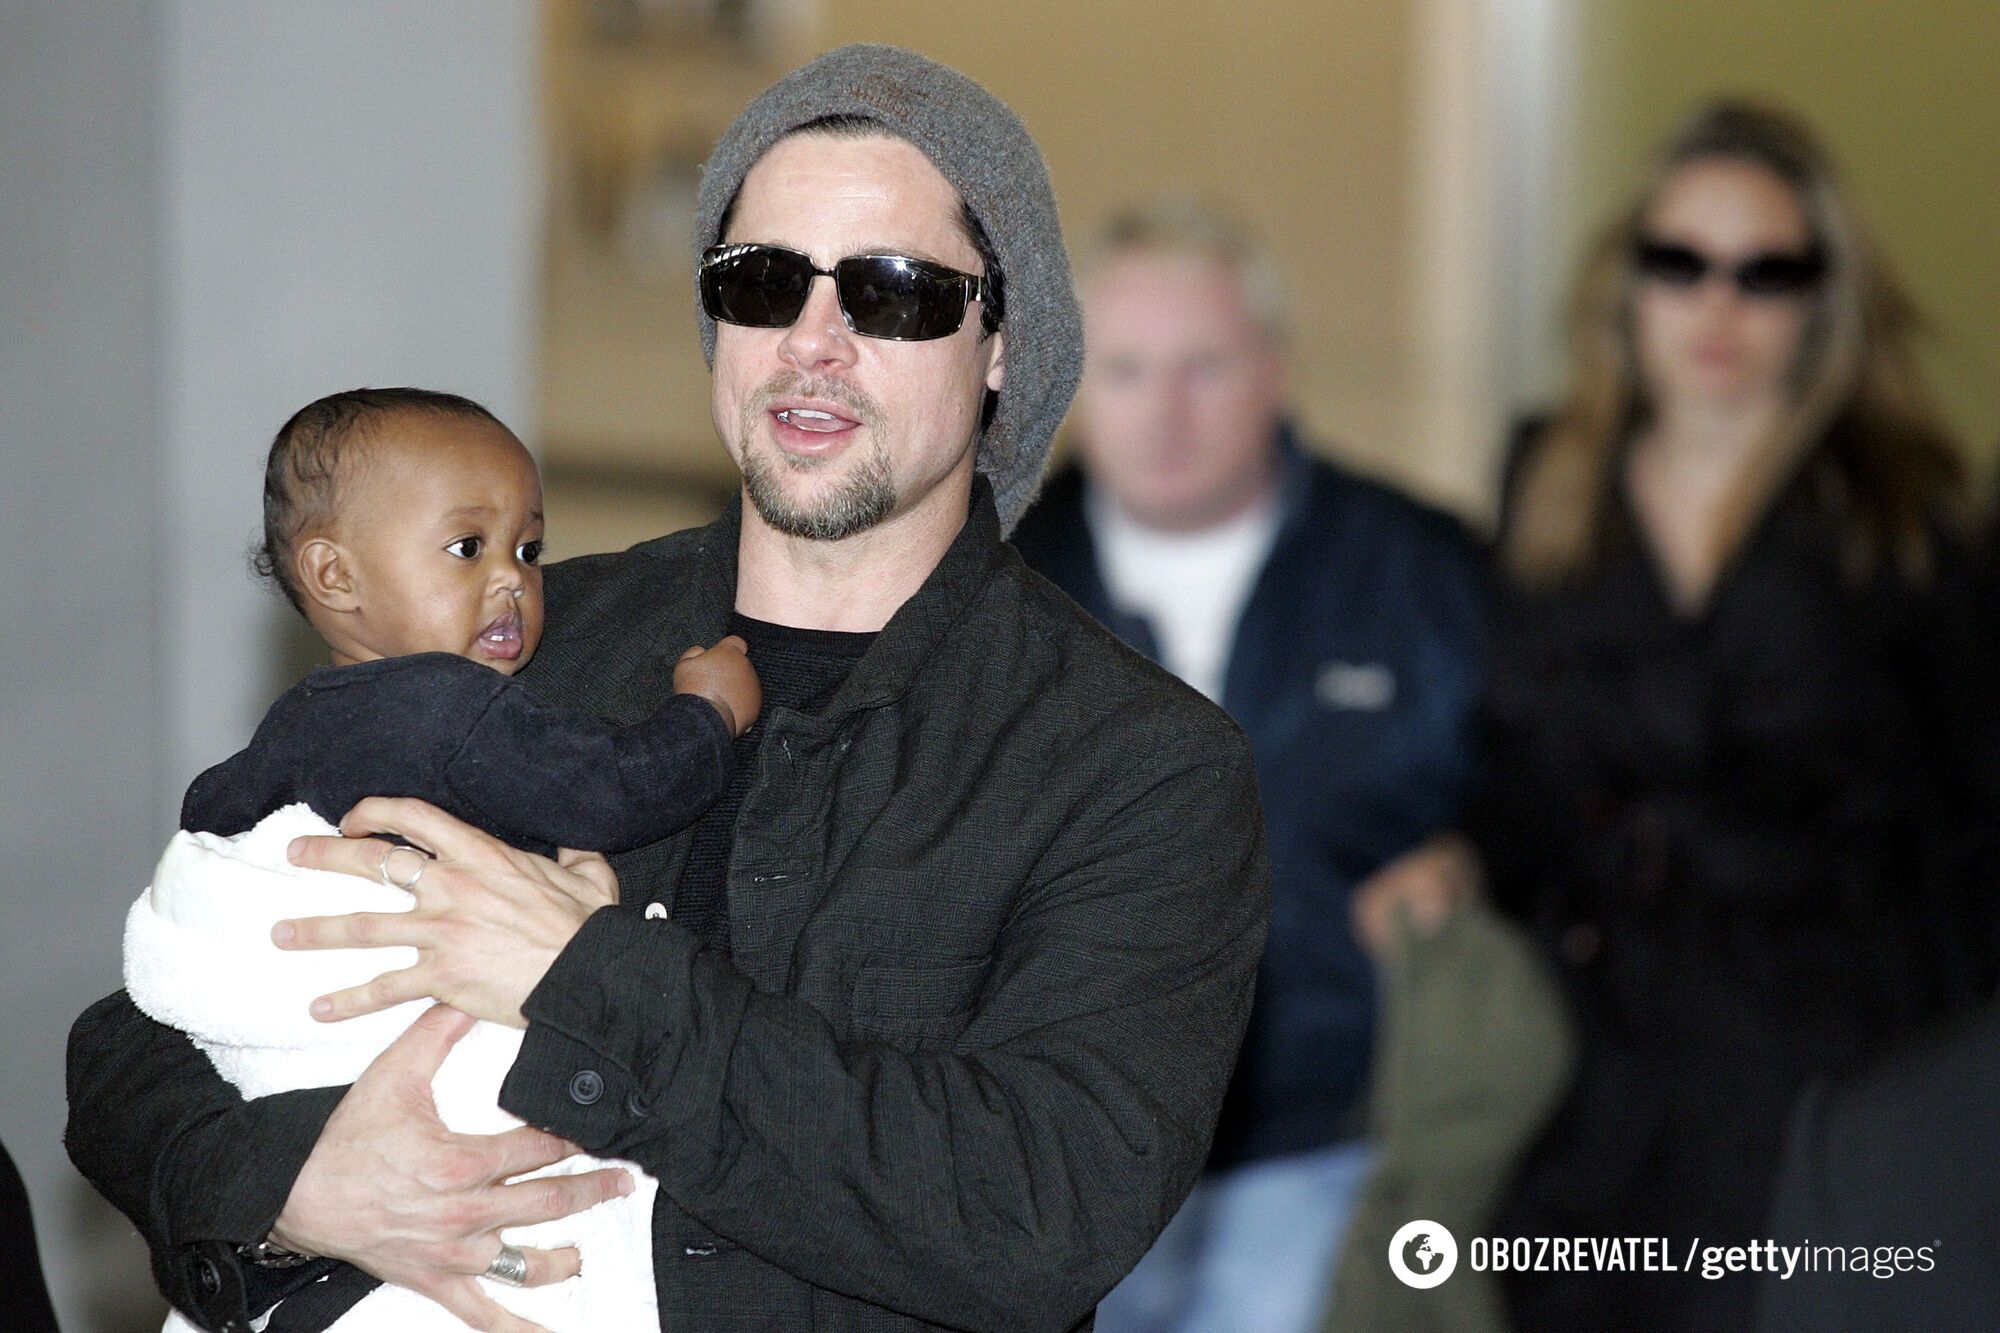 Jolie and Pitt's adopted daughter publicly disowned her father after scandalous divorce: what other challanges she has endured